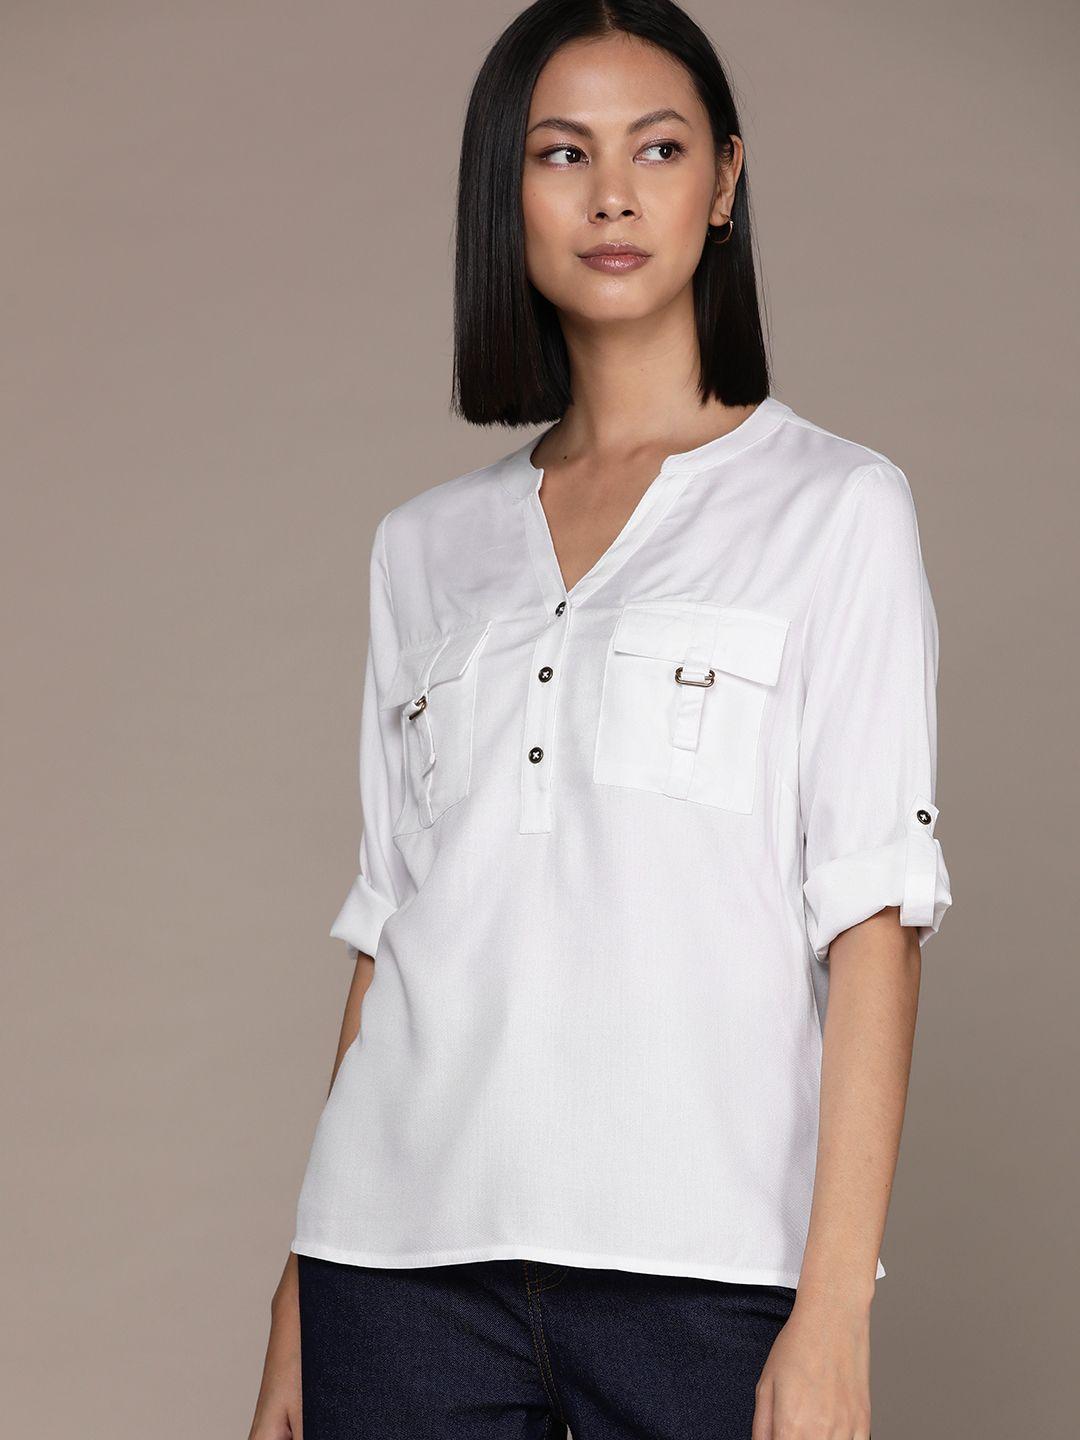 roadster solid roll-up sleeves shirt style top